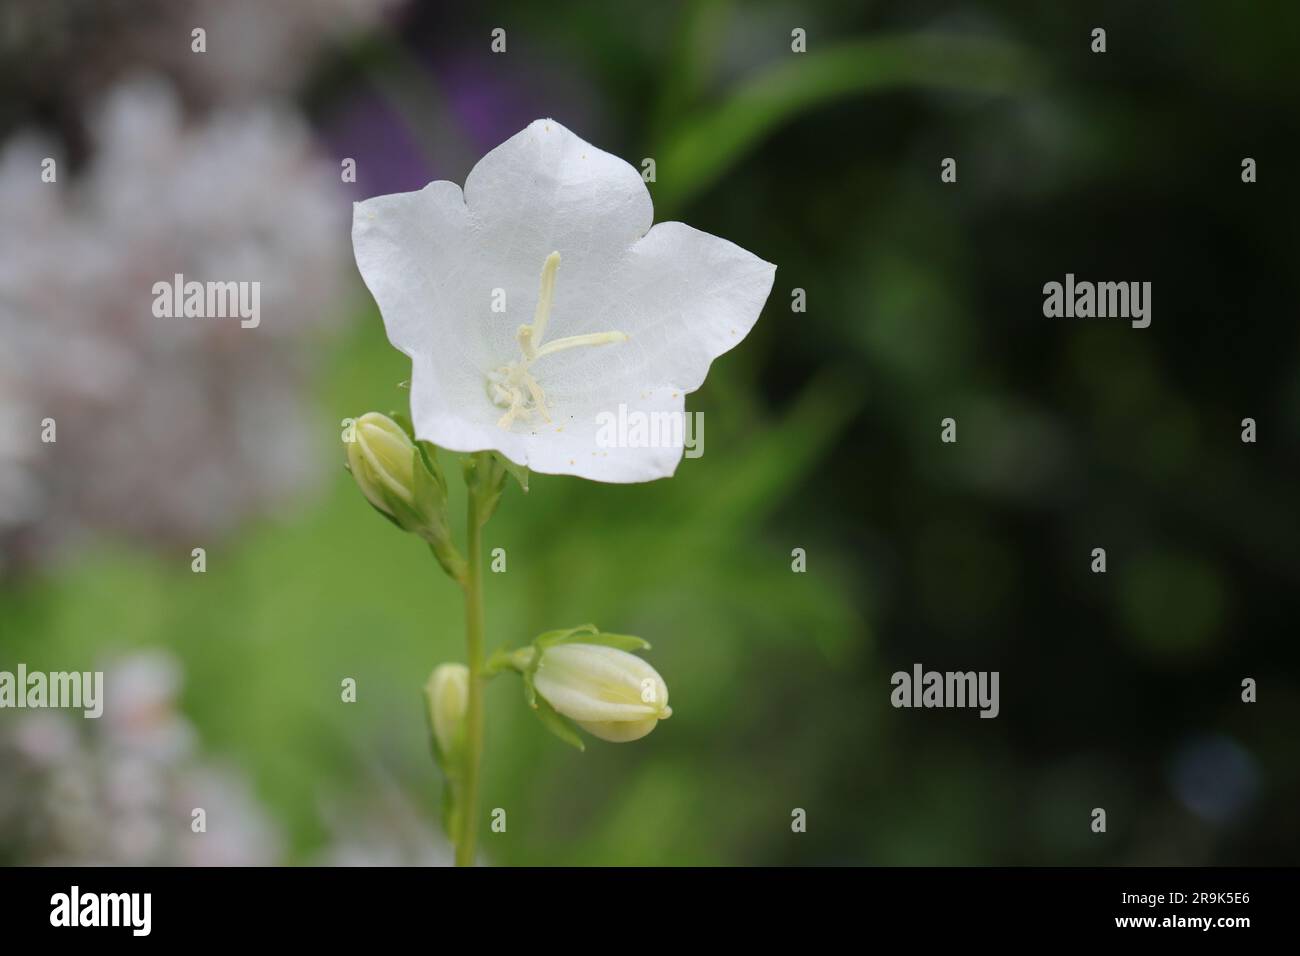 close-up of a beautiful white campanula persicifolia against a green blurry background, direct view of the wide-open flower Stock Photo